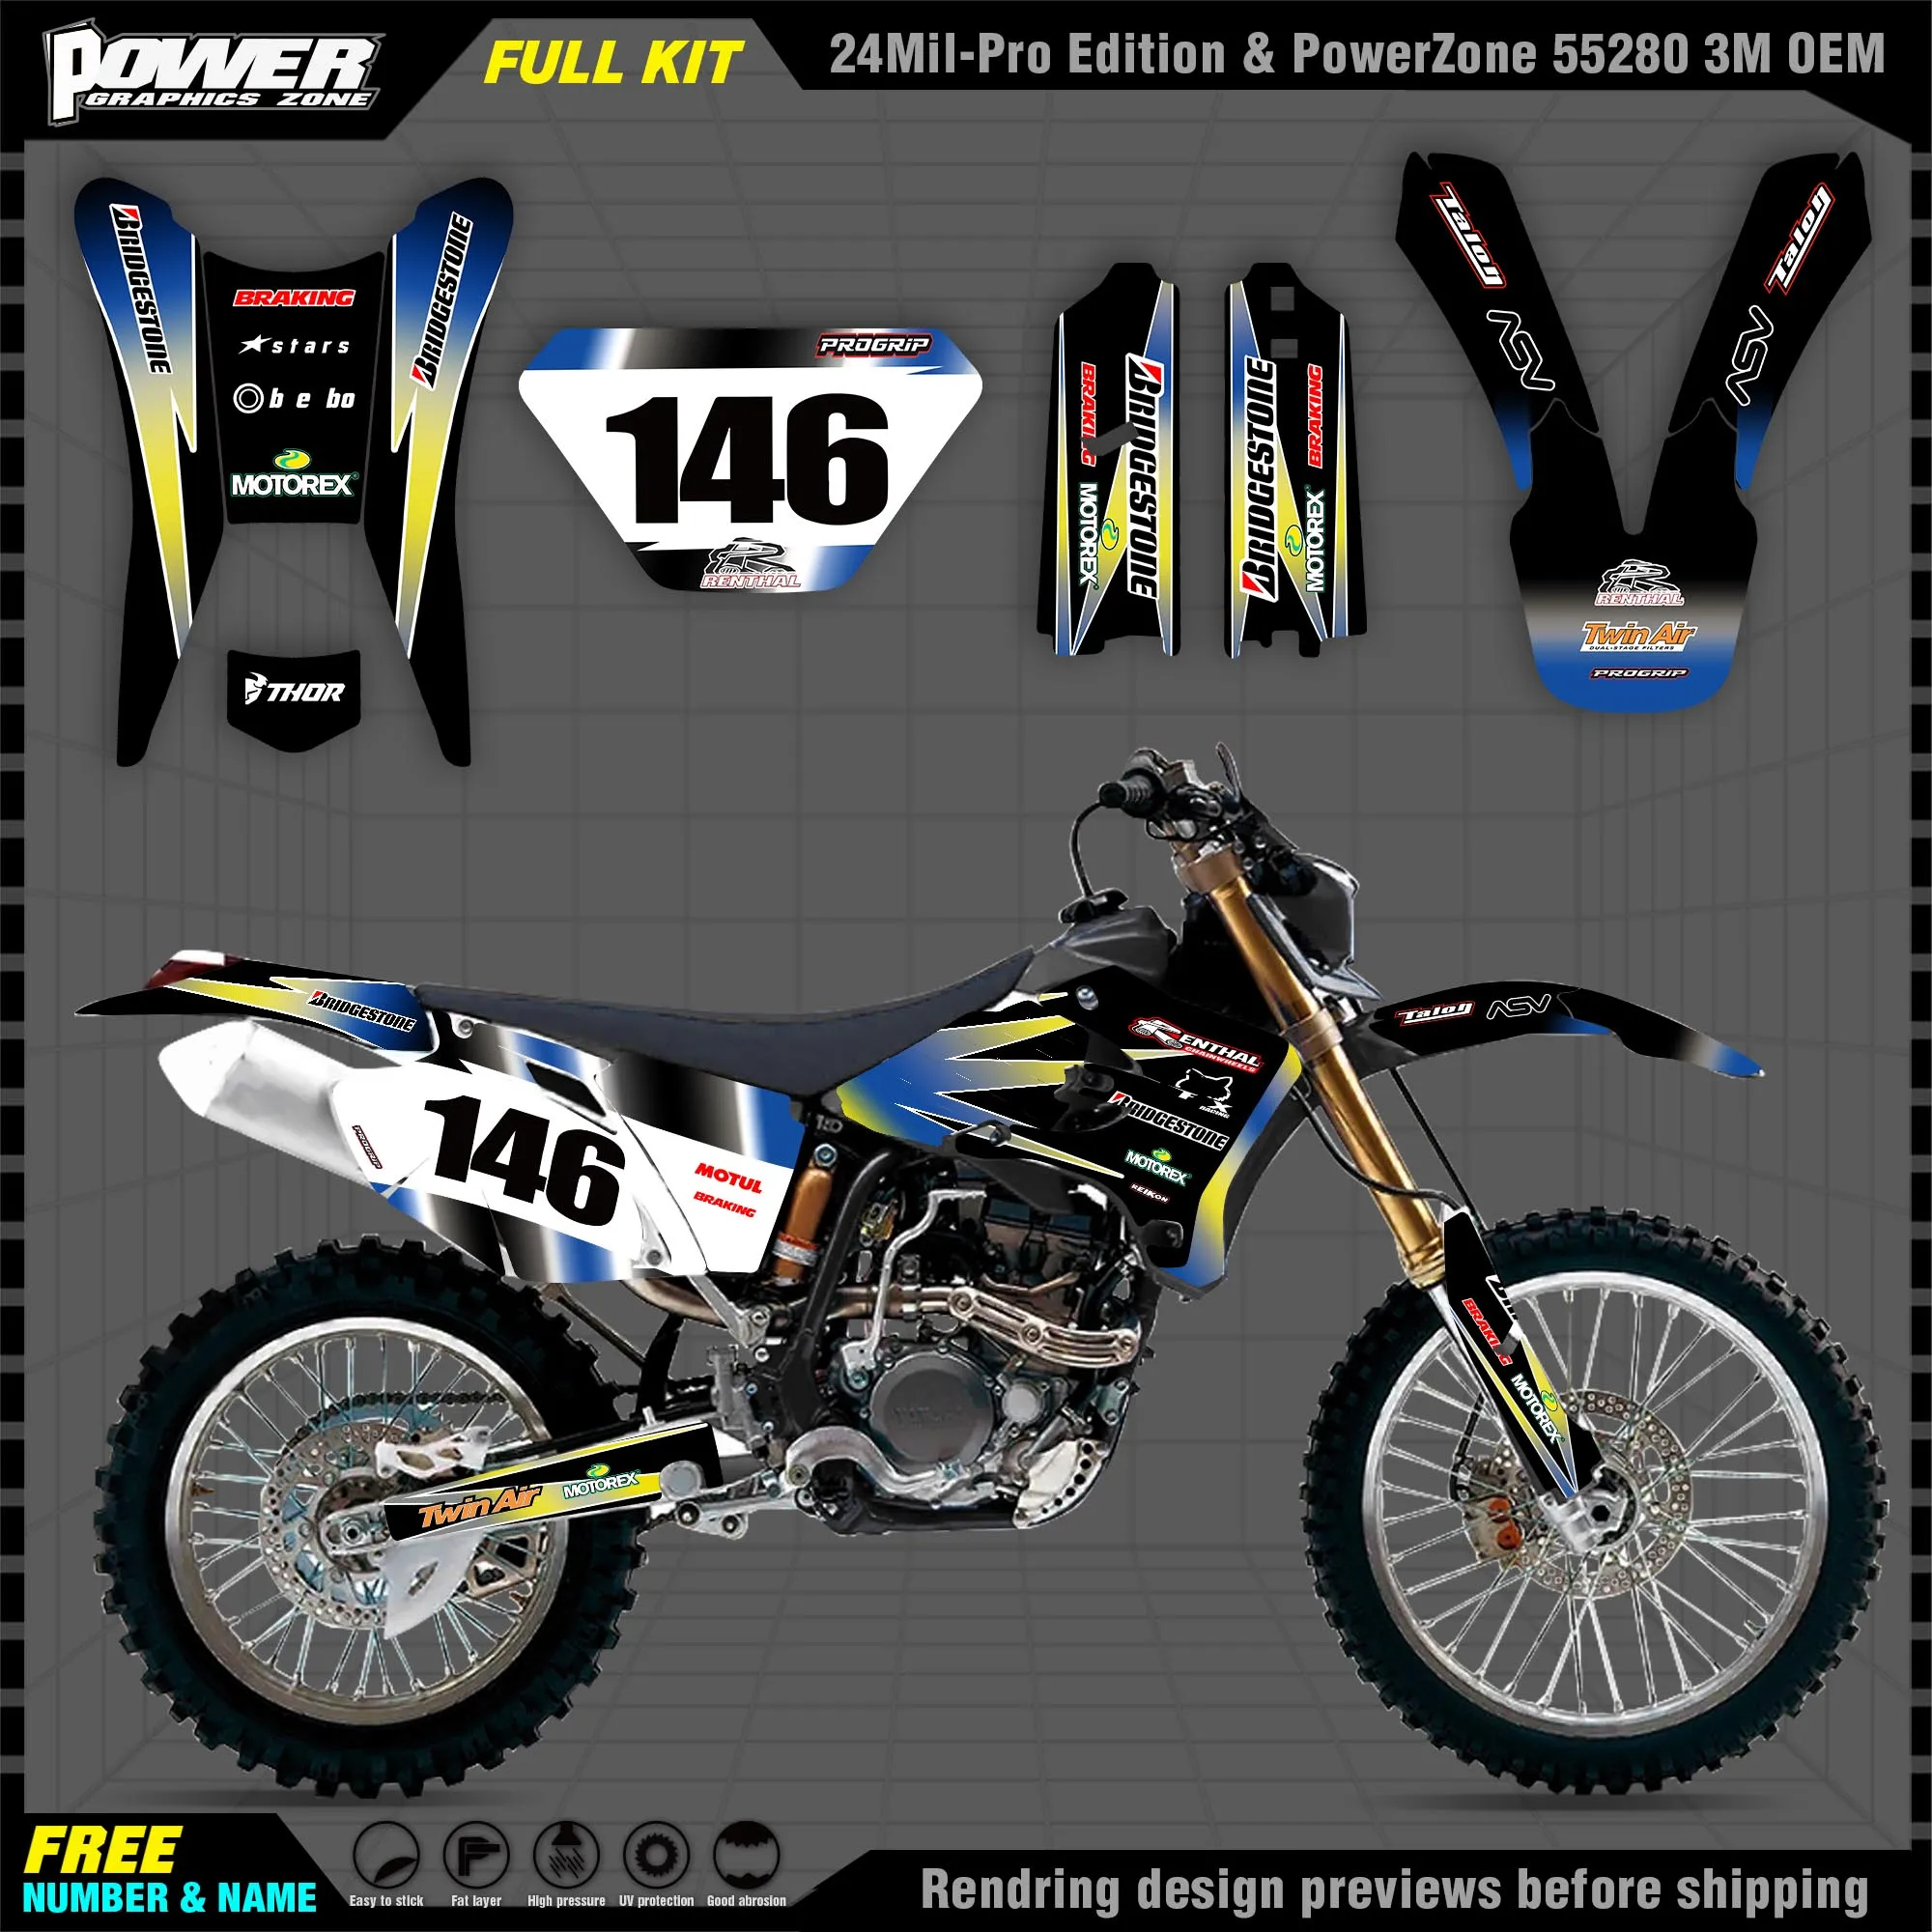 

PowerZone Custom Team Graphics Backgrounds Decals 3M Stickers Kit For YAMAHA 03-04 05-06 WRF250 450 Stickers 009